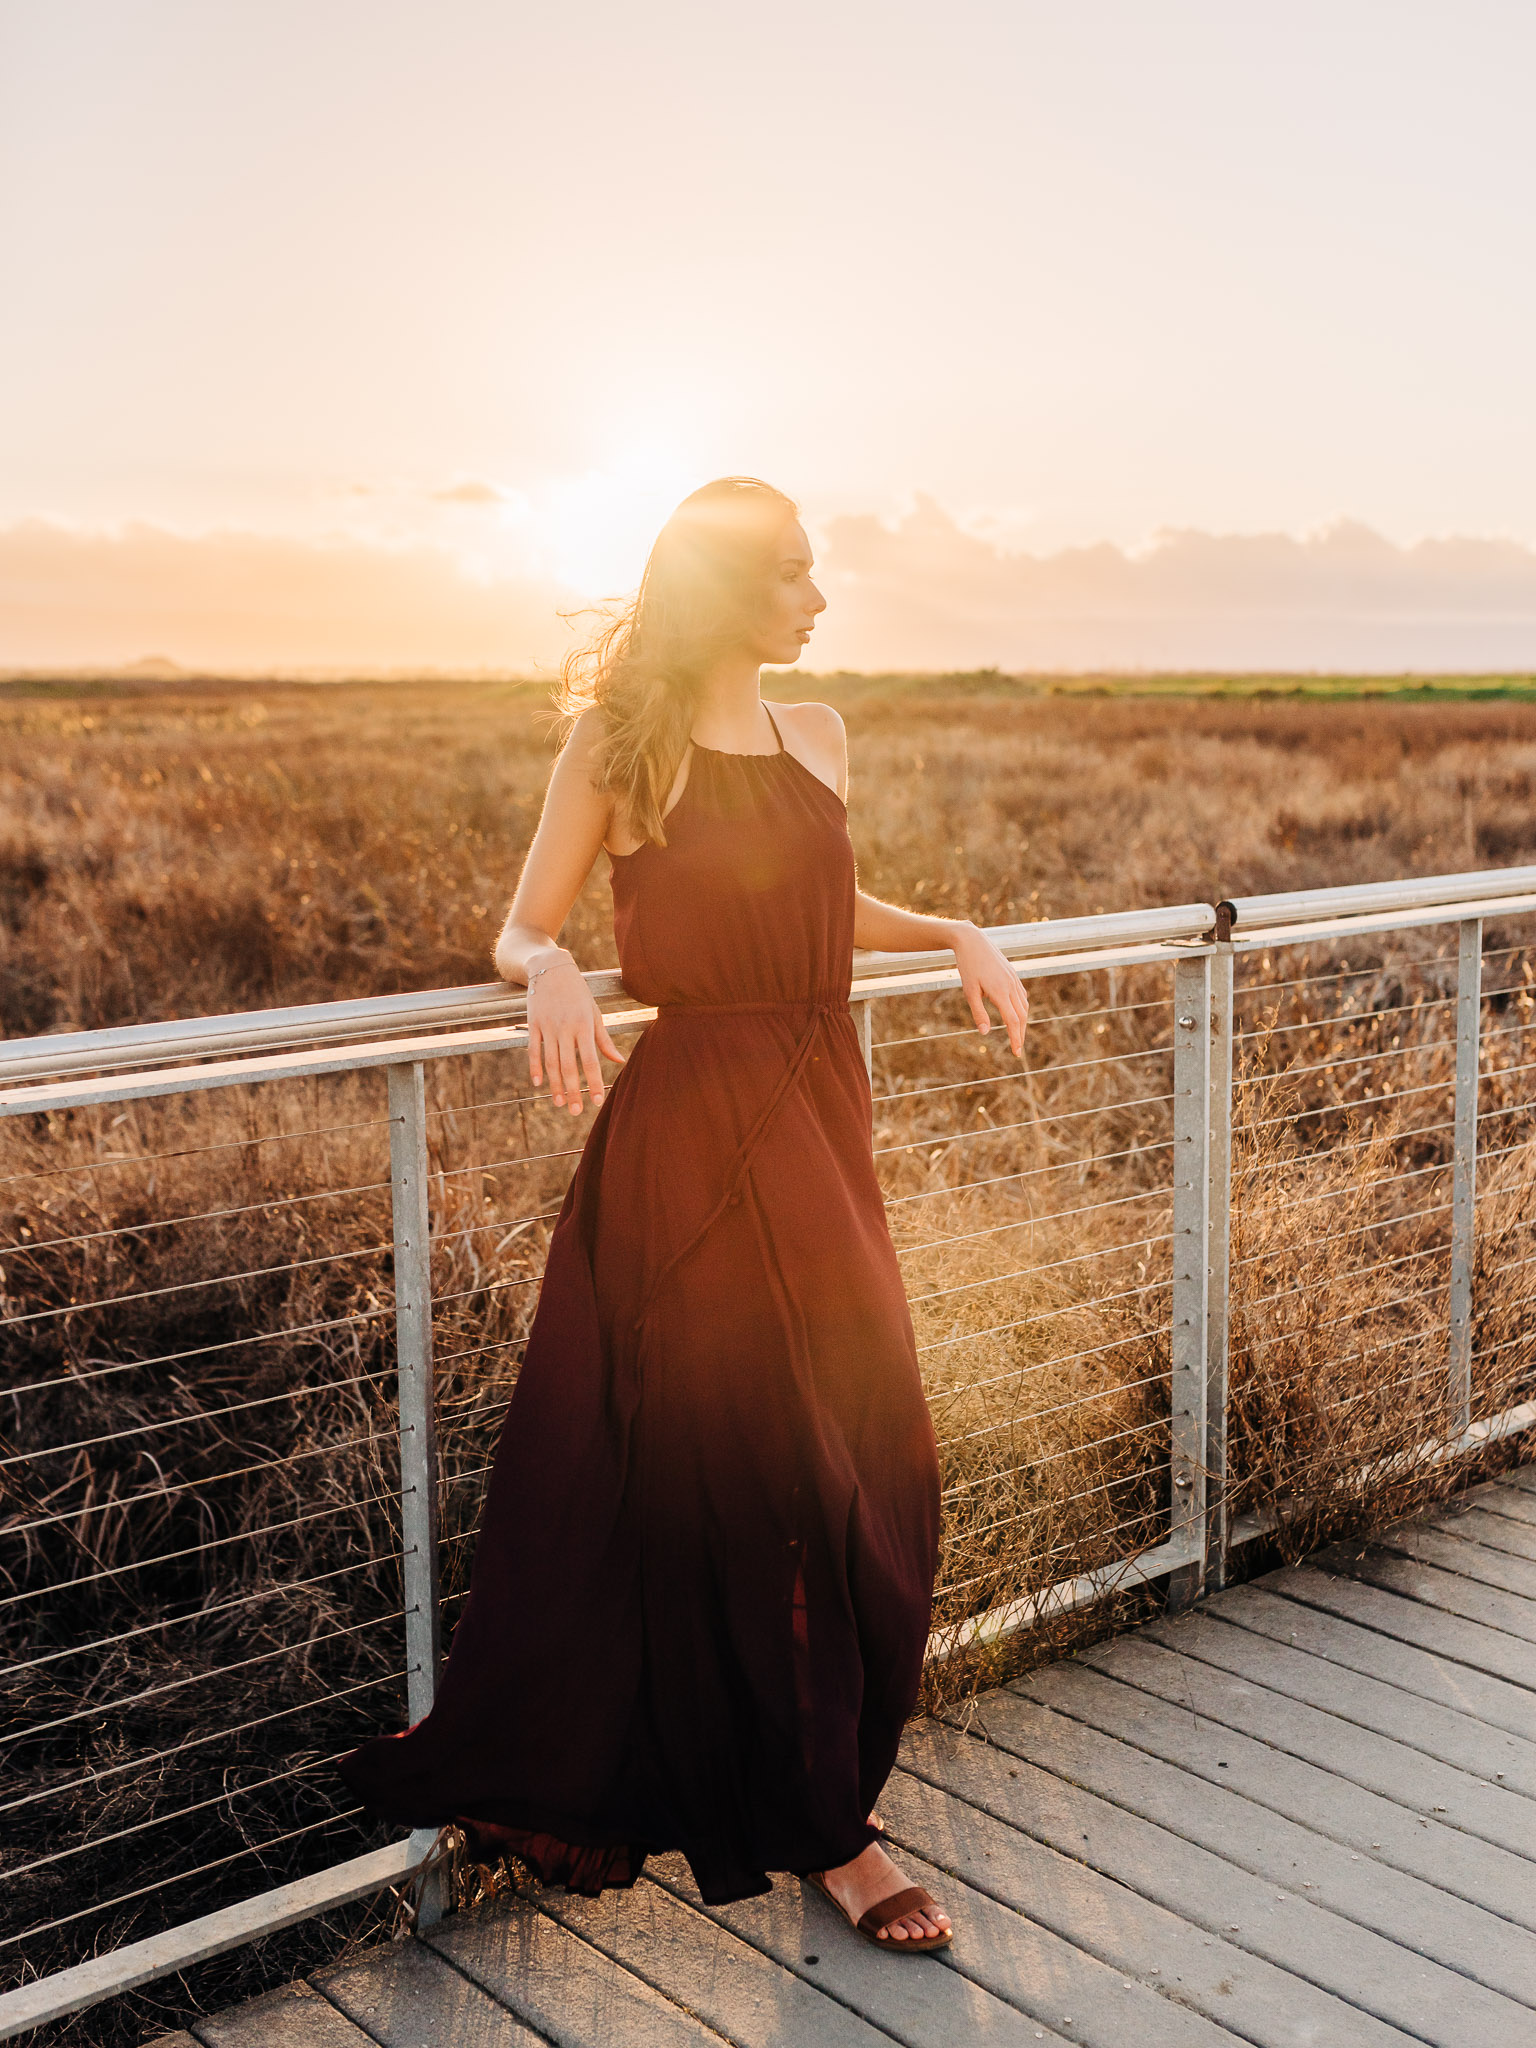 Teen in maroon dress leaning on railing with a sunset nature backdrop, by Emily Kim Photography.